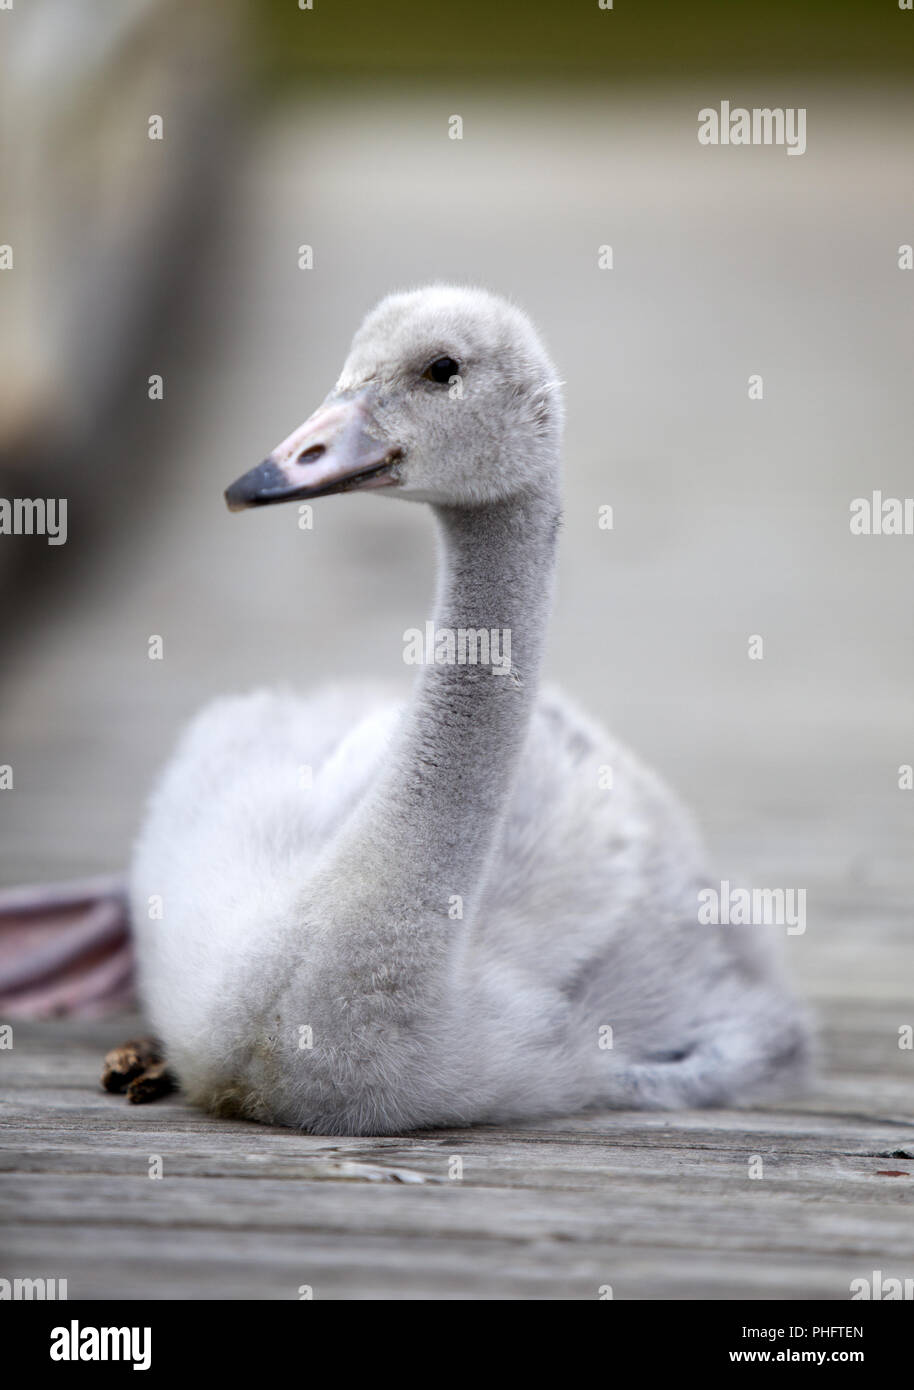 The baby bird of a swan on the mooring Stock Photo